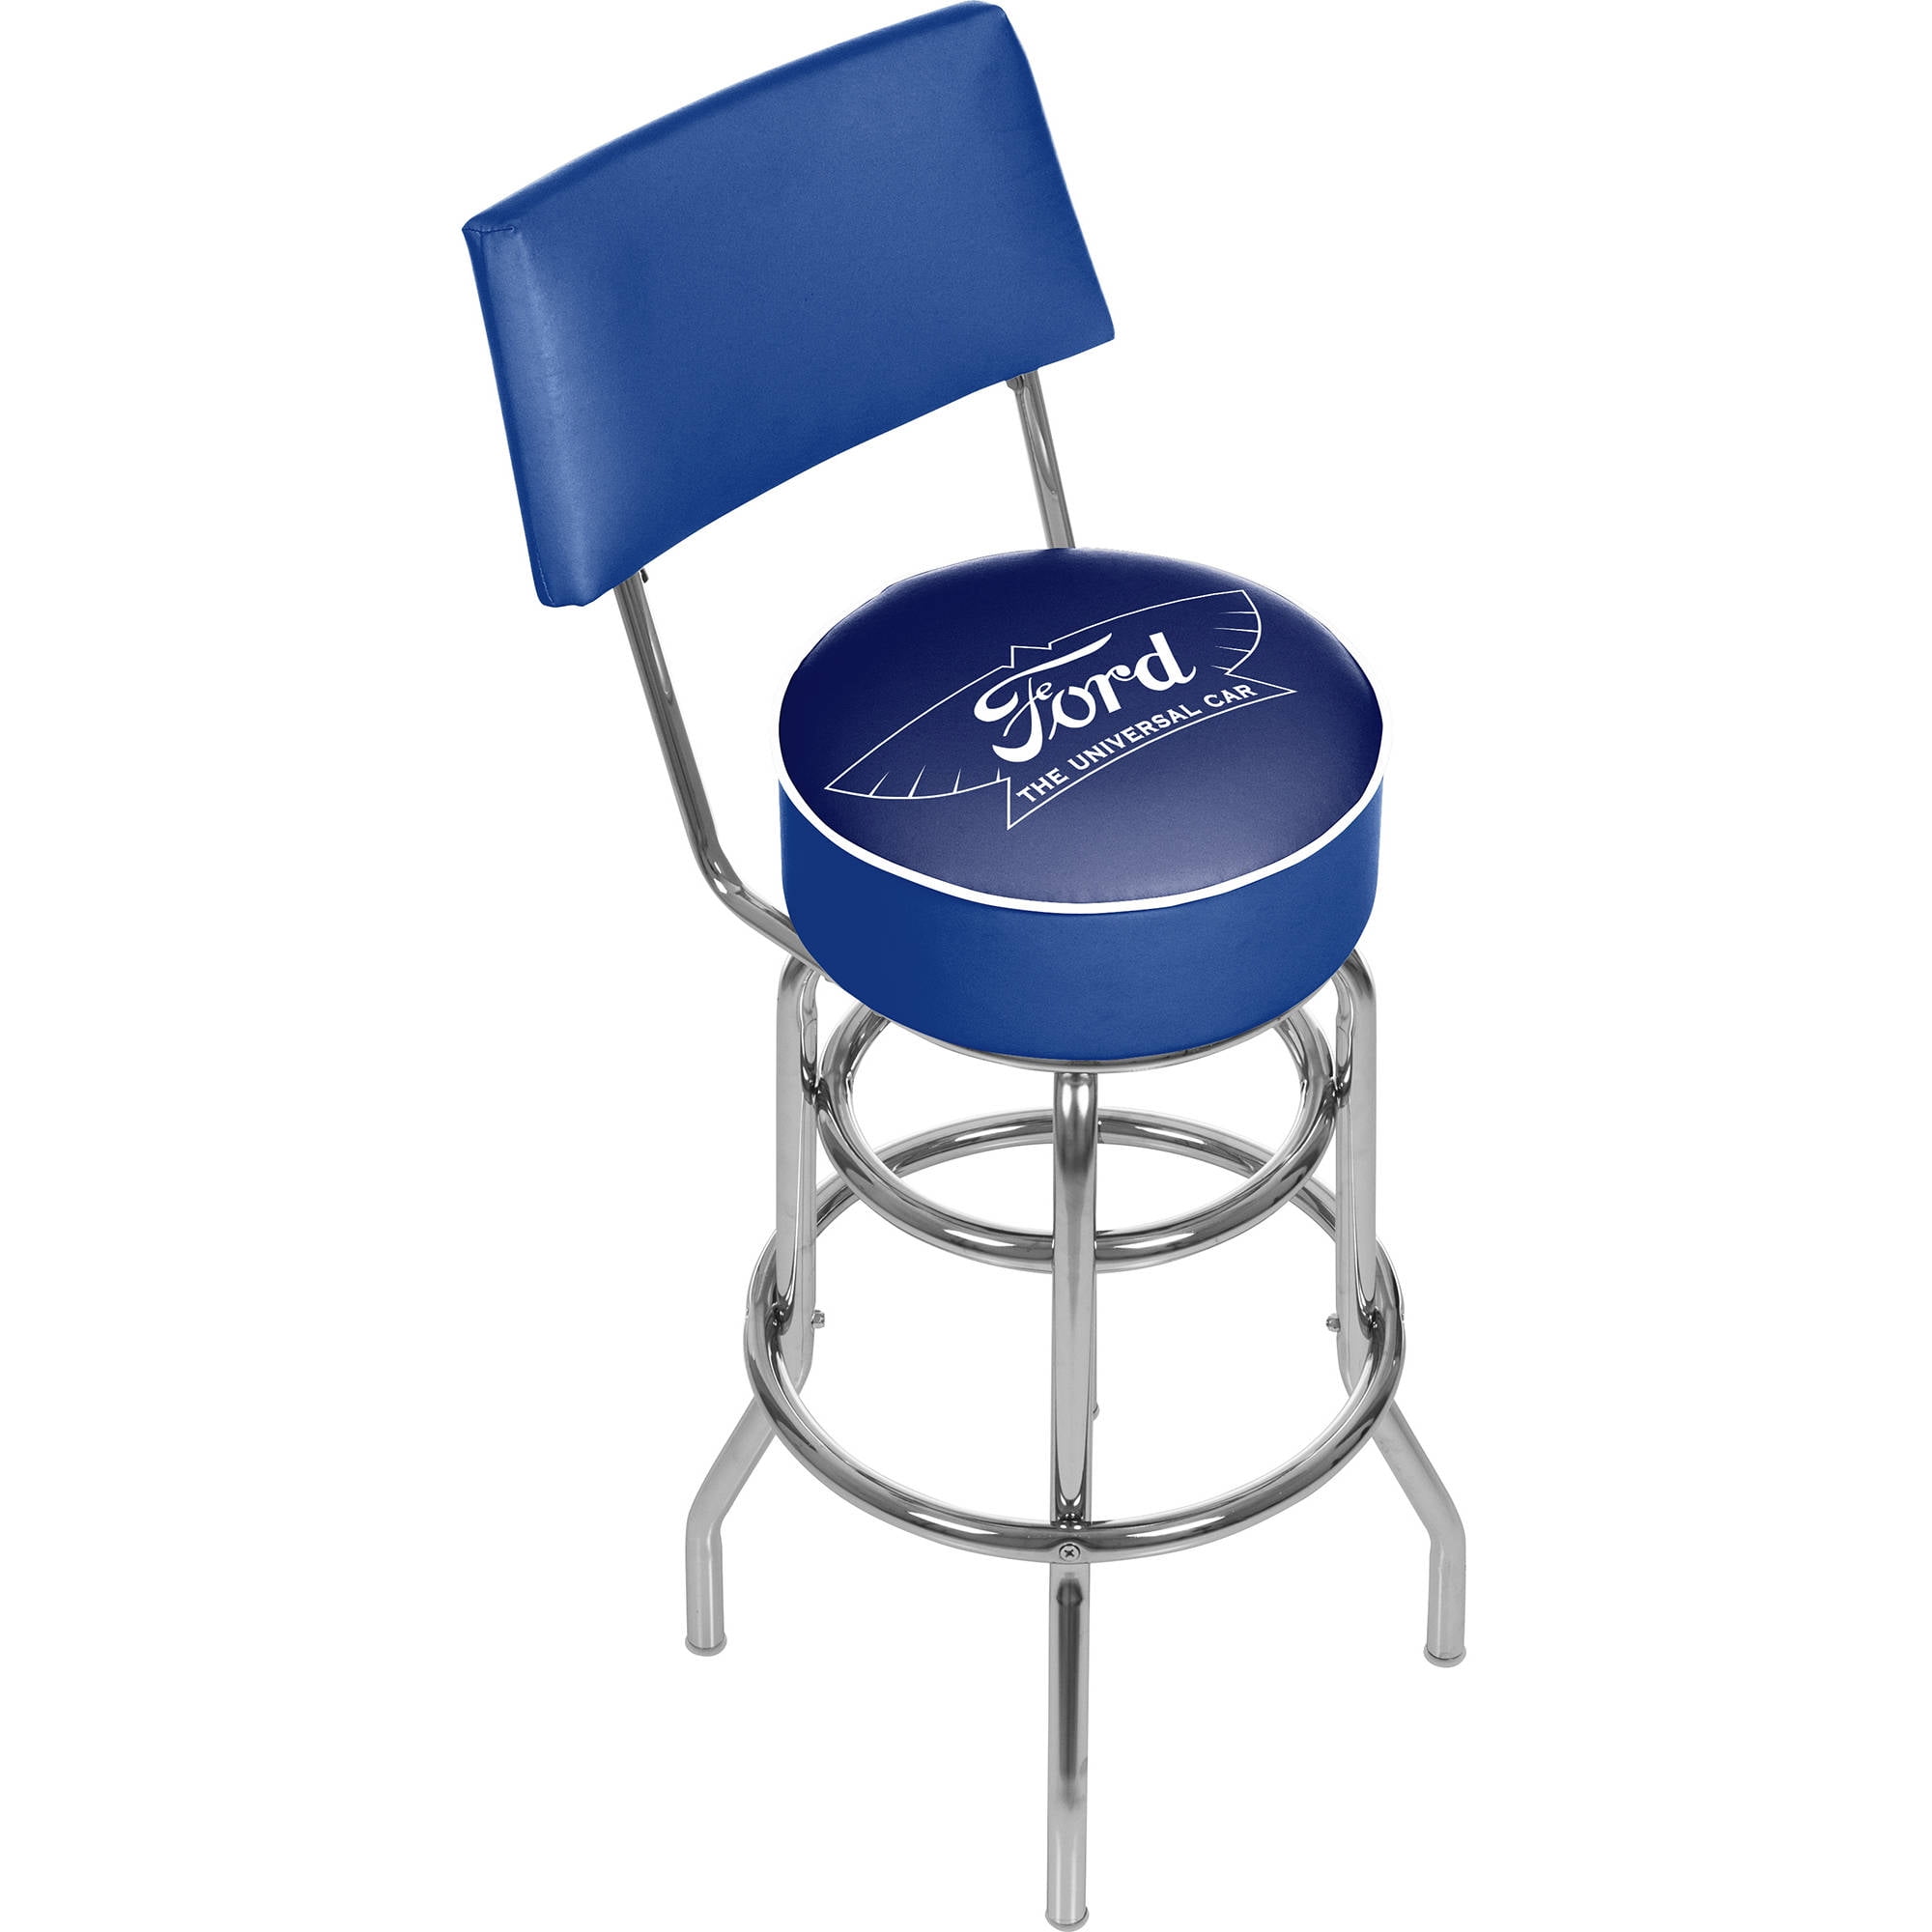 Swivel Seat Bar Stool Imperial Officially Licensed NCAA Furniture 